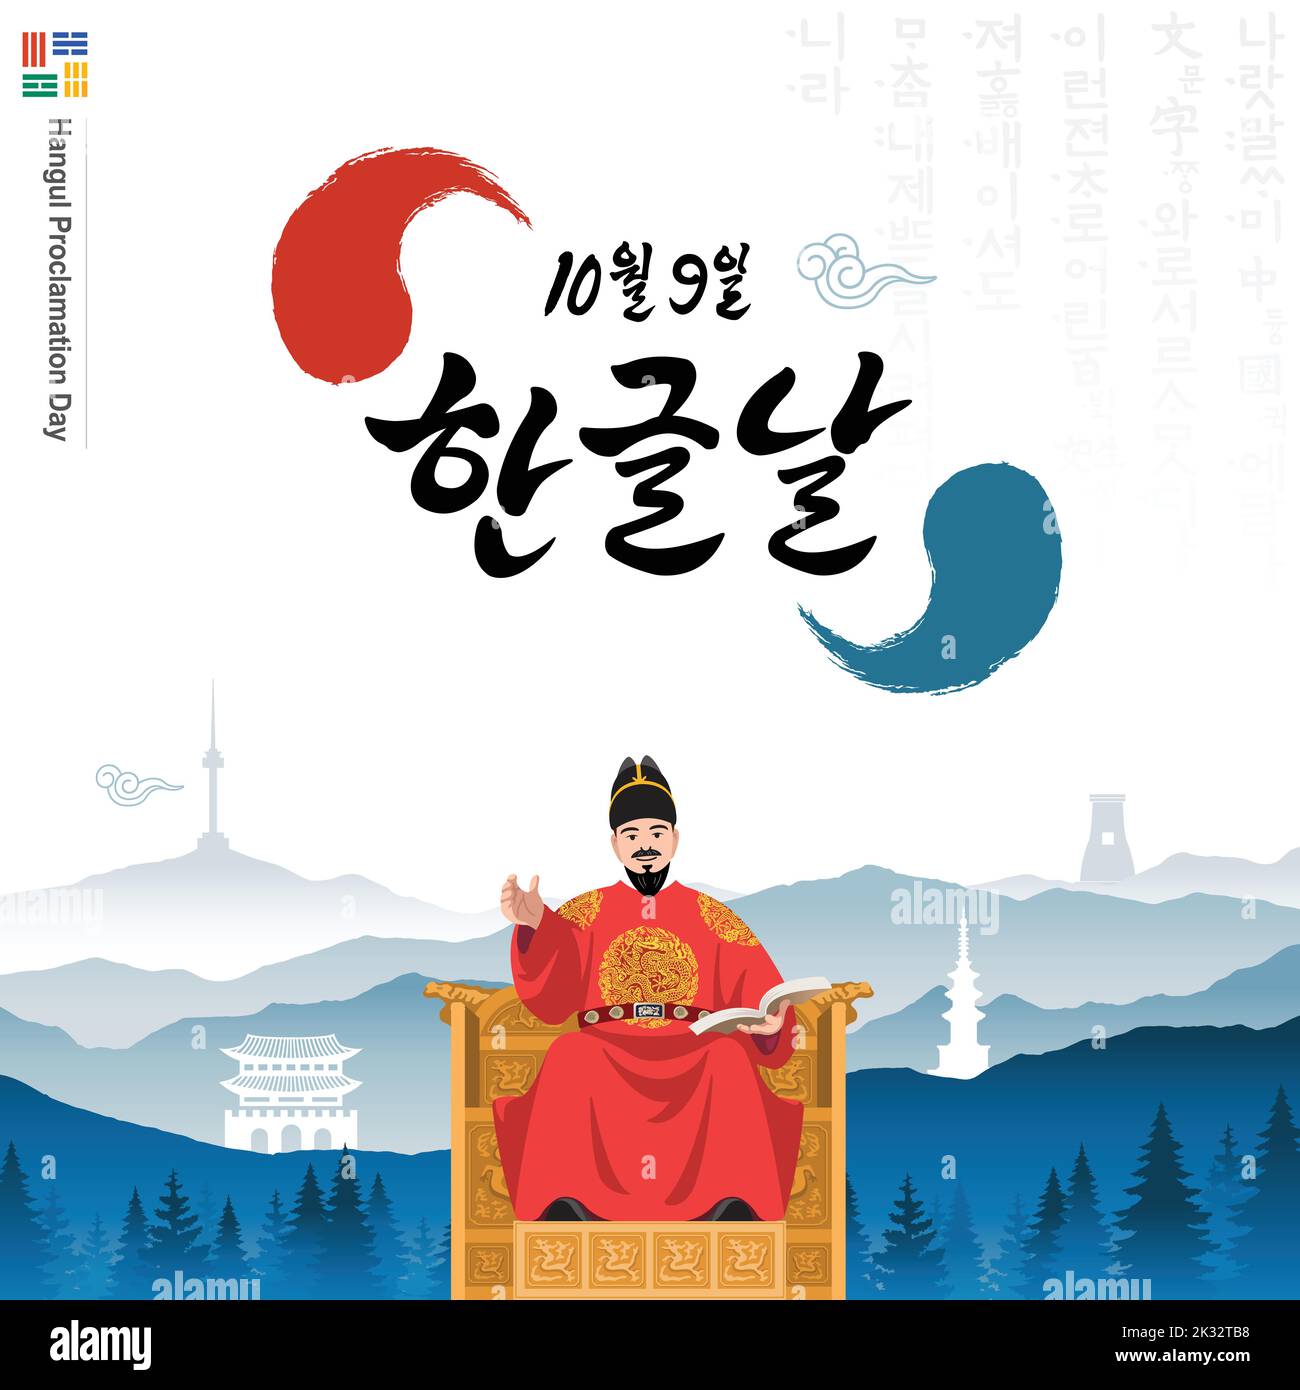 Hangul Proclamation Day event design. King Sejong the Great, cultural property, mountain background. Stock Vector